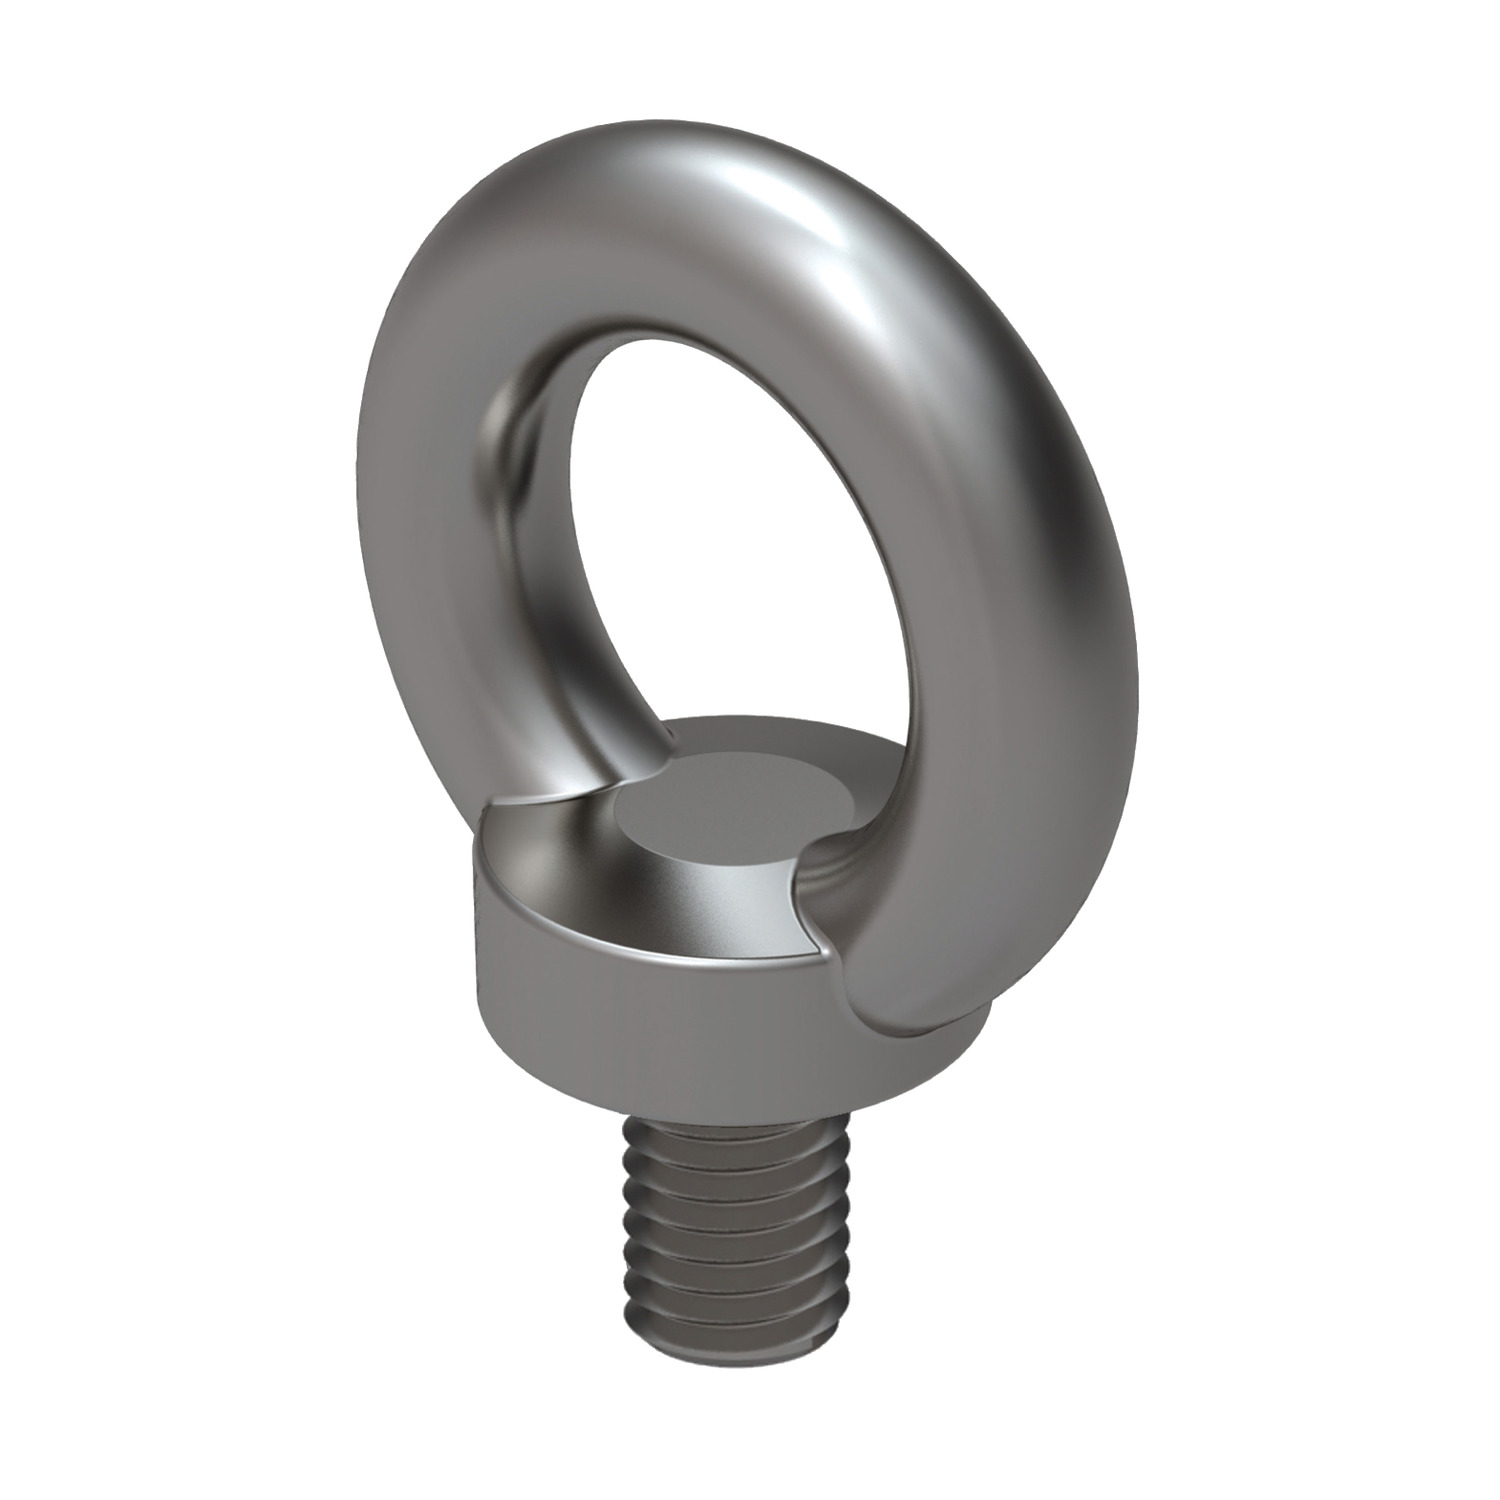 P4043 - Stainless Male Lifting Eye Bolts